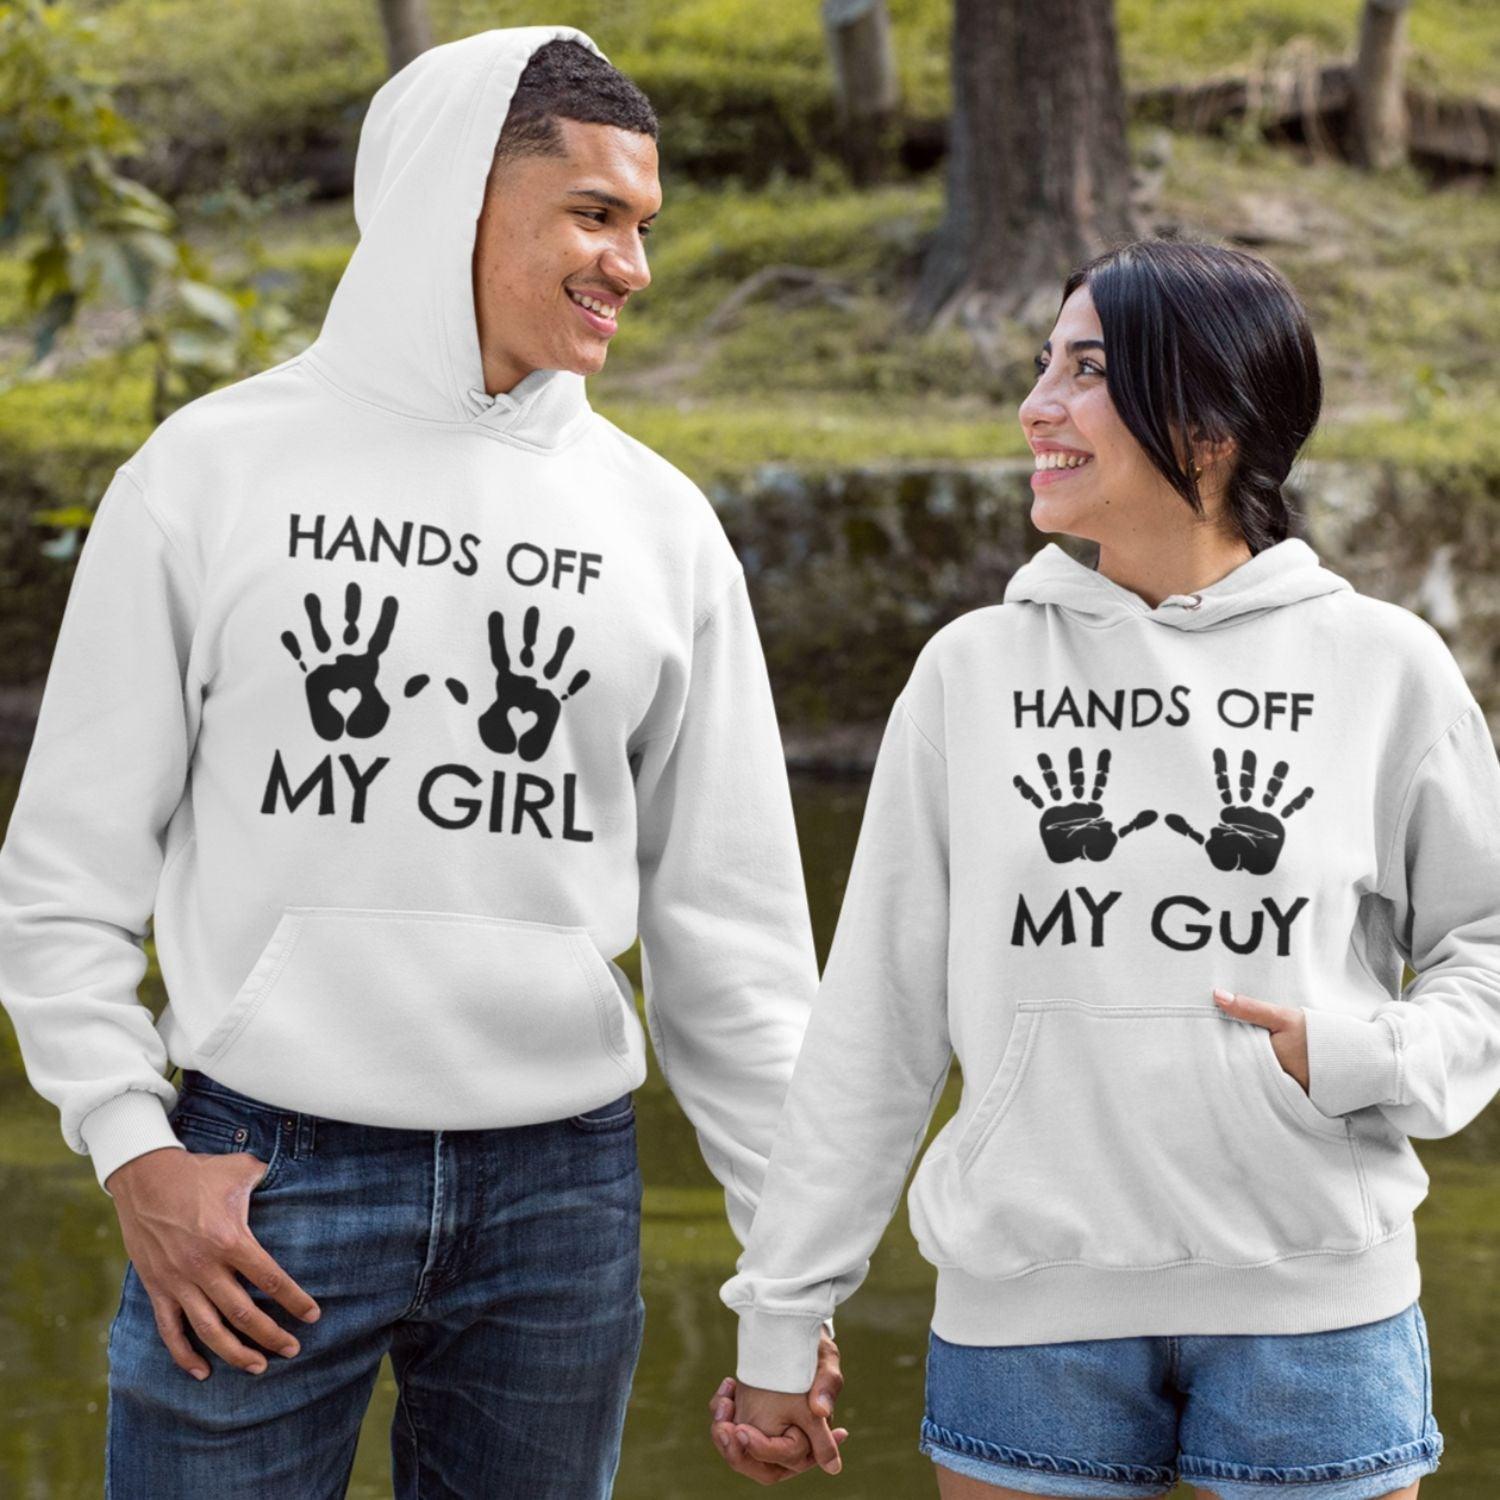 Hands Off My Girl/My Guy Set, Funny Jealous Outfits, Anniversary Gift, Matching Set - 4Lovebirds